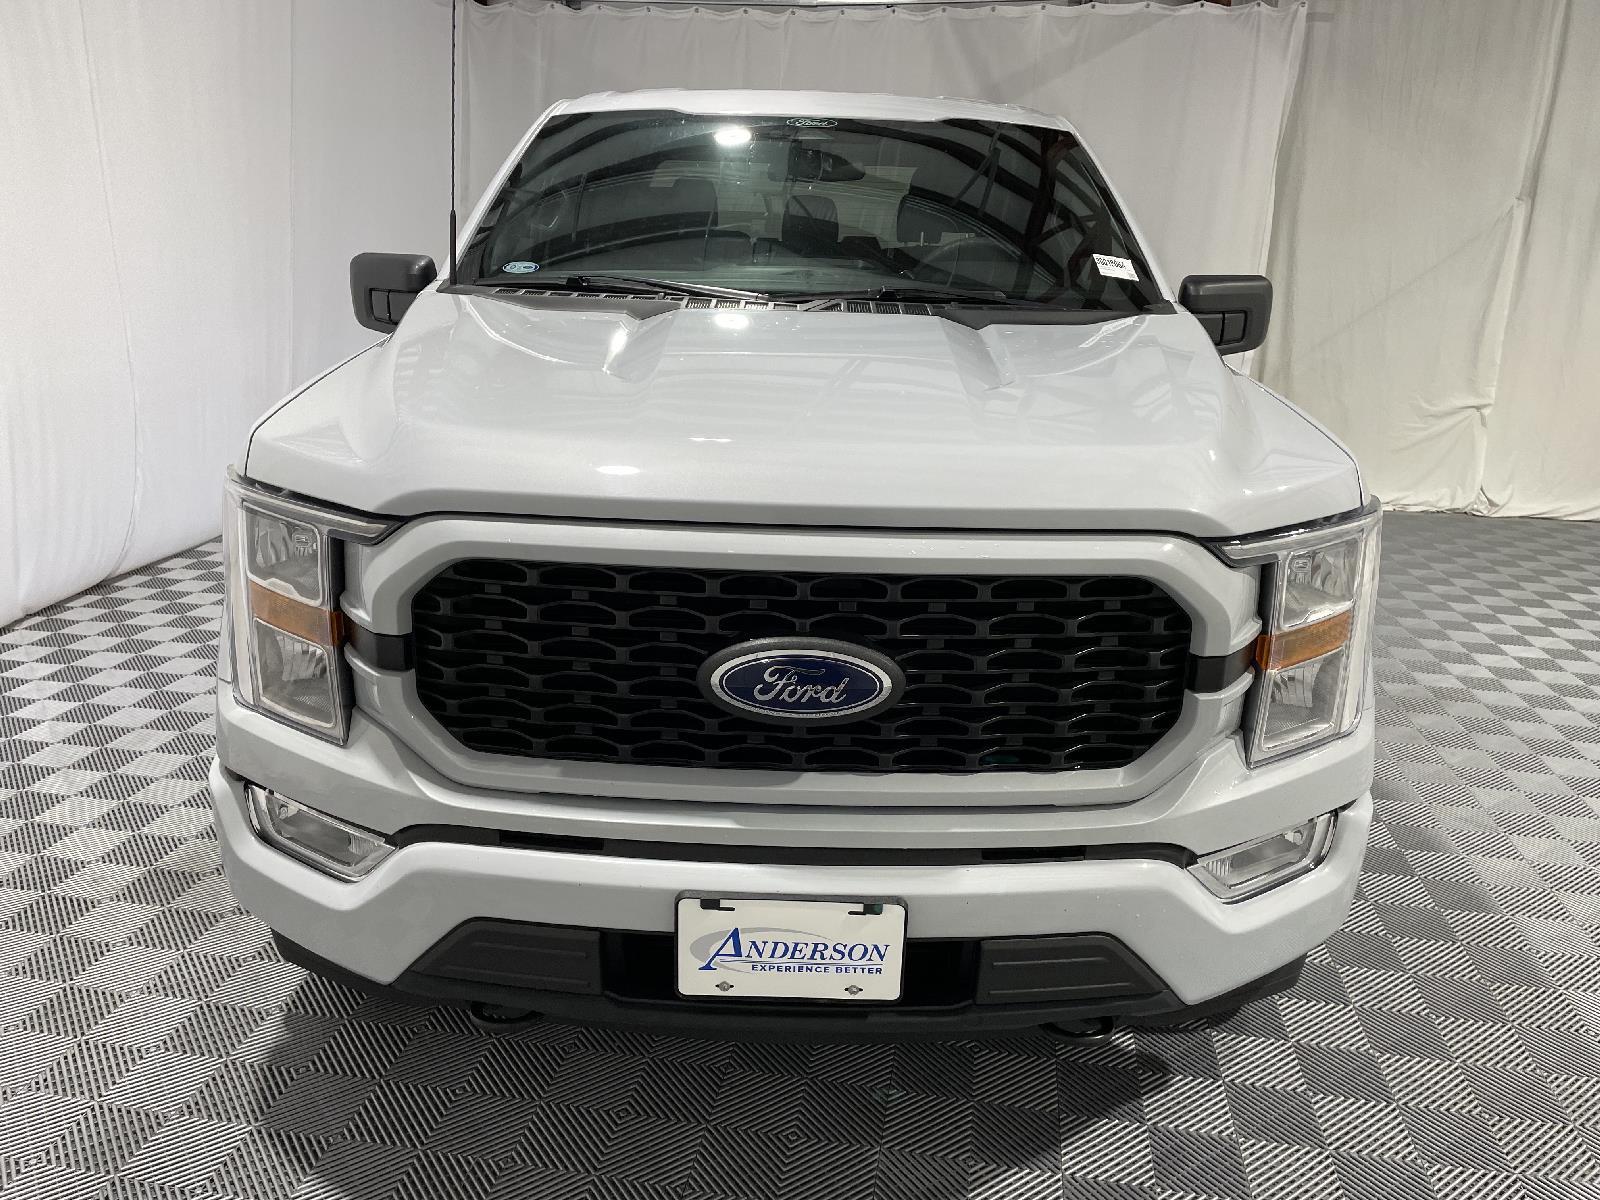 Used 2022 Ford F-150 XL Crew Cab Truck for sale in St Joseph MO